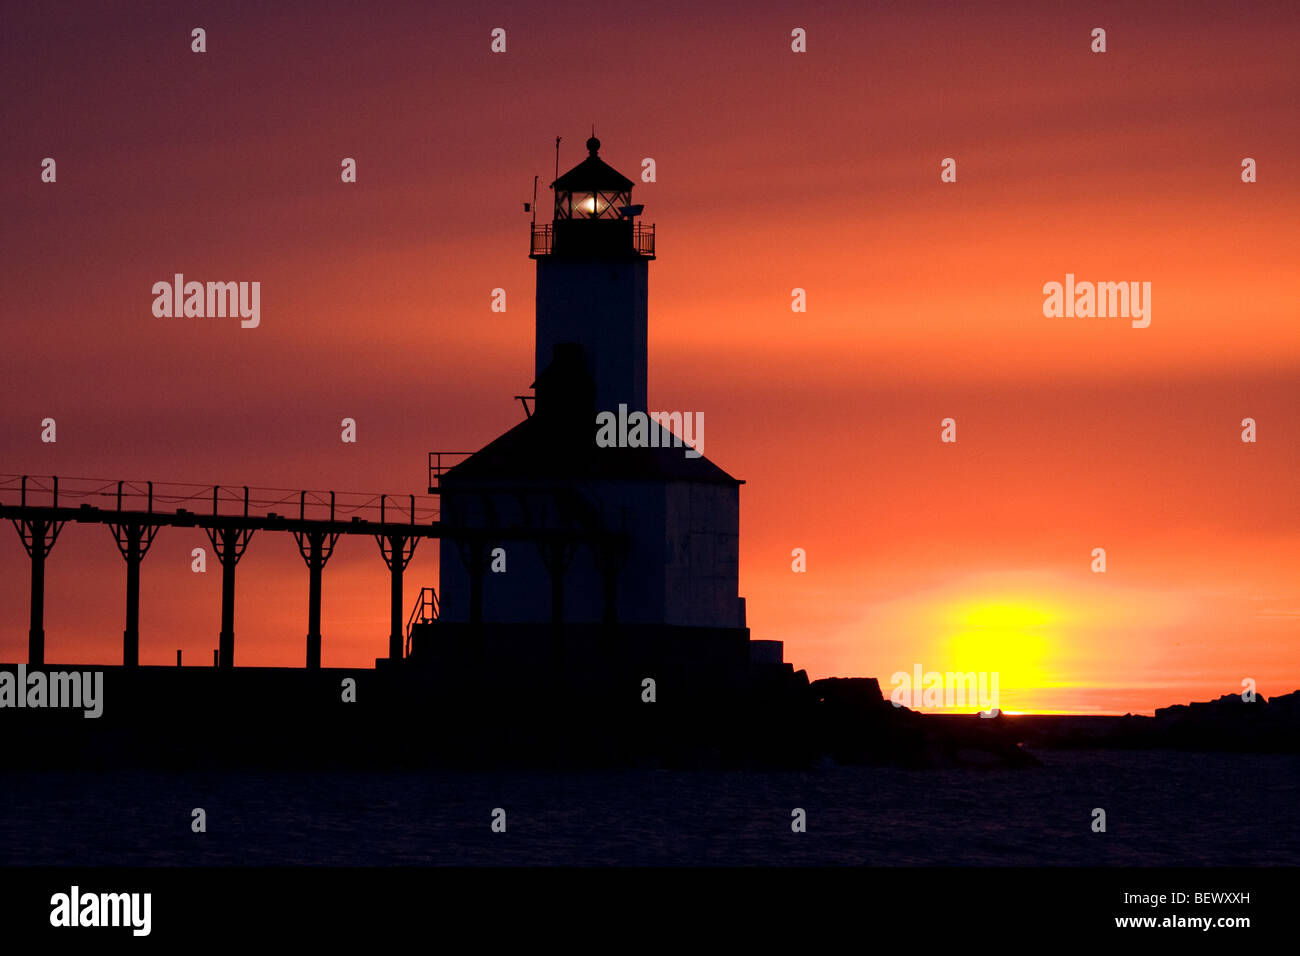 Silhouette of the lighthouse and catwalk in Michigan City Indiana at sunset Stock Photo